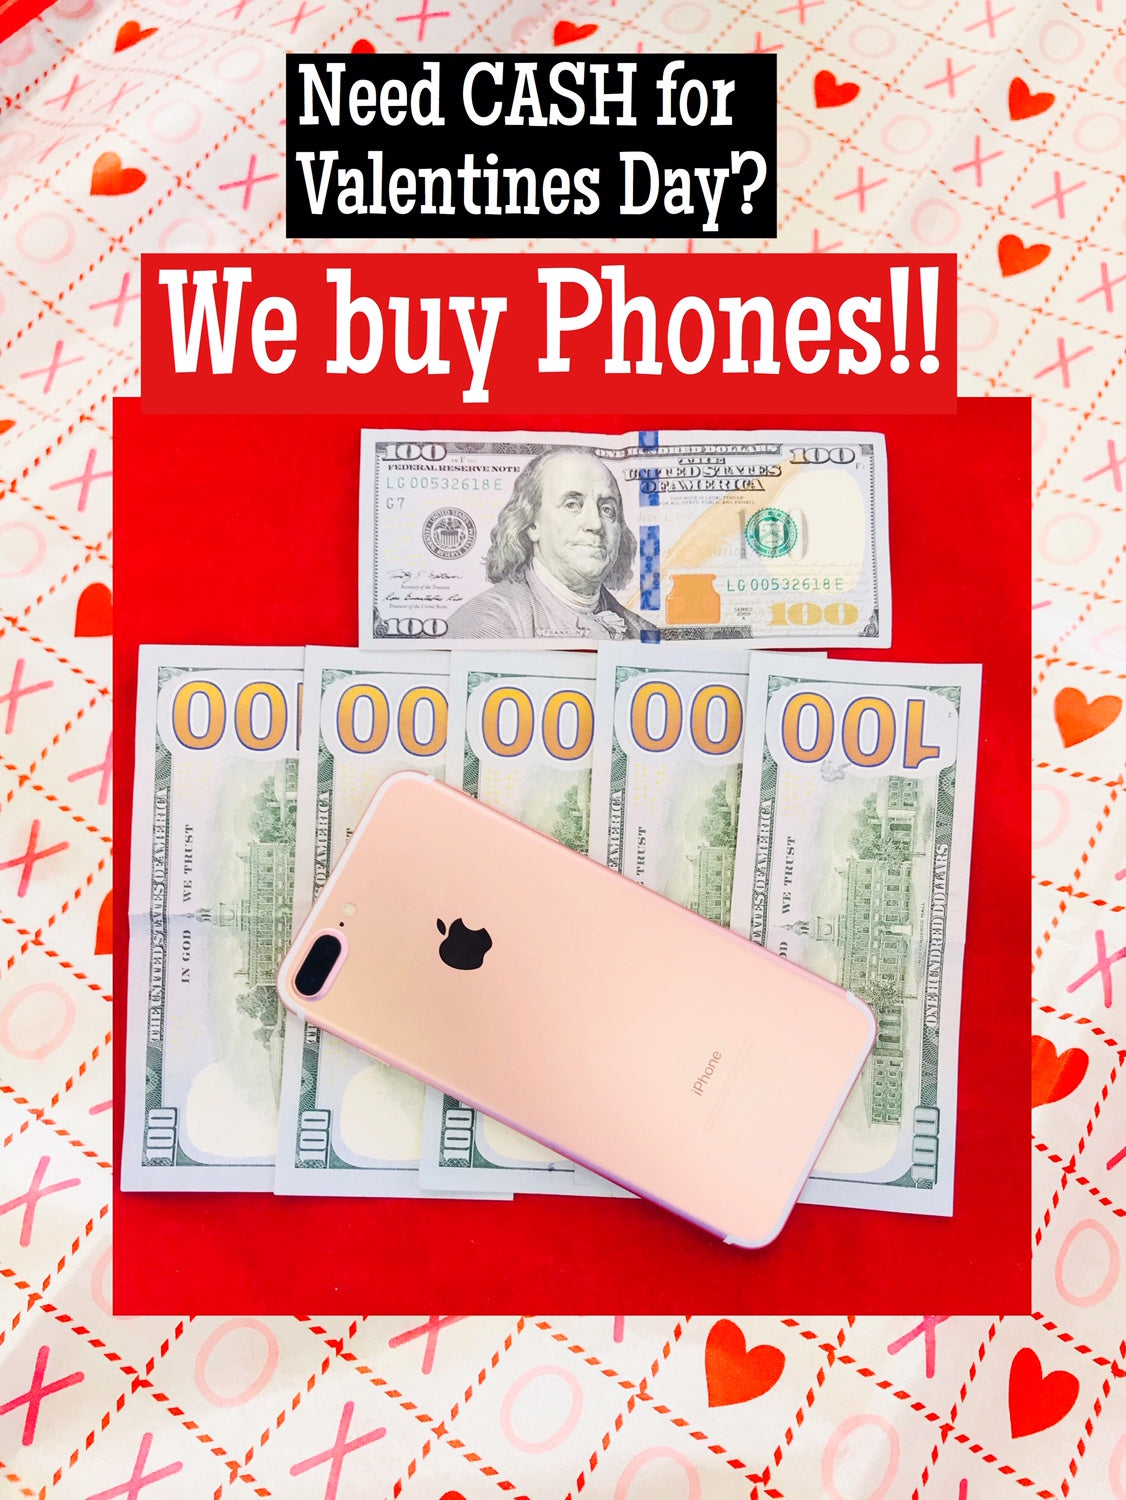 Need Cash for Valentines Day ?!? We got your back! Sell your iphones for instant cash!